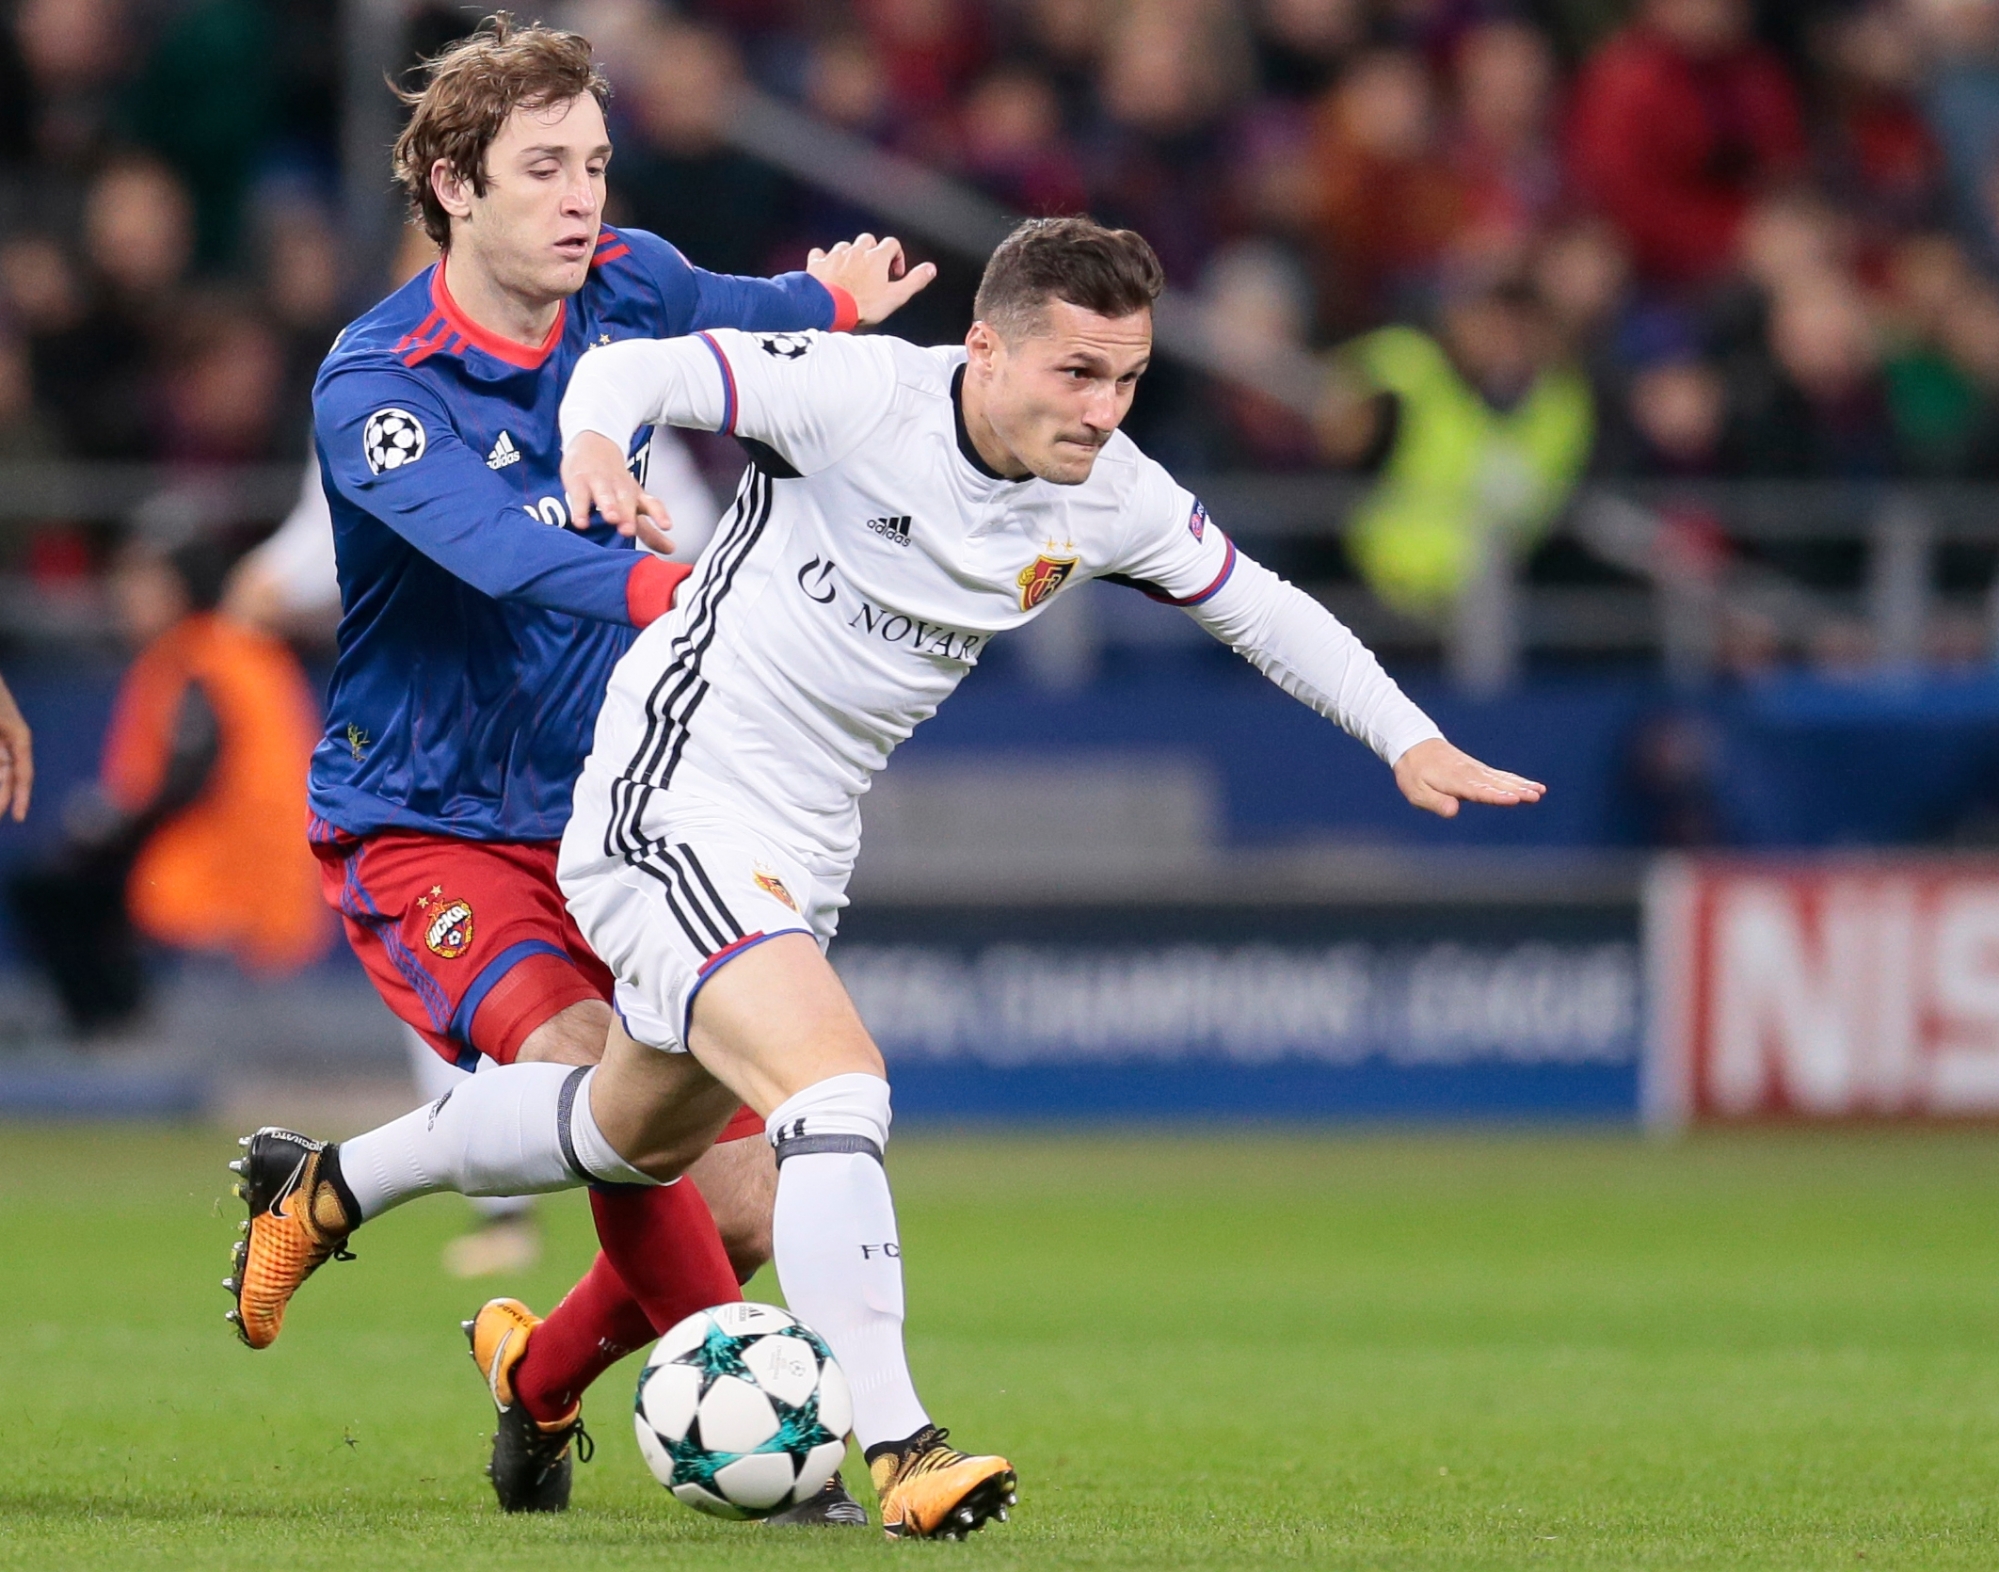 CSKA's Mario Fernandes, left, challenges for the ball with Basel's Taulant Xhaka during the Champions League Group A soccer match between CSKA Moscow and Basel in Moscow, Russia, Wednesday, Oct. 18, 2017. (AP Photo/Ivan Sekretarev) Russia Soccer Champions League